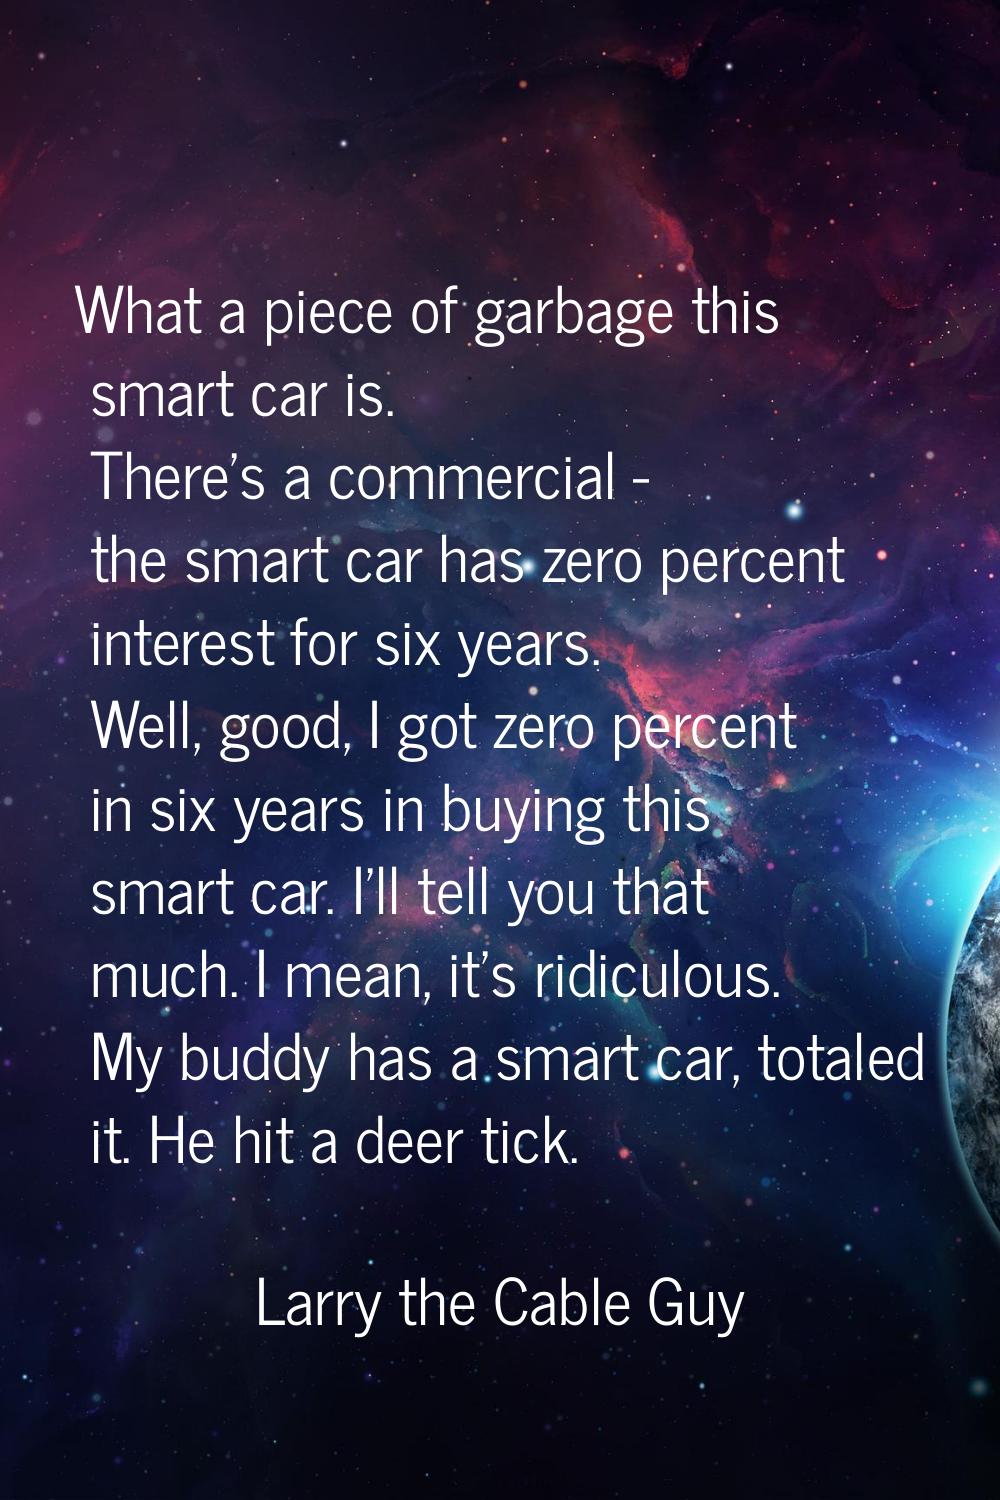 What a piece of garbage this smart car is. There's a commercial - the smart car has zero percent in